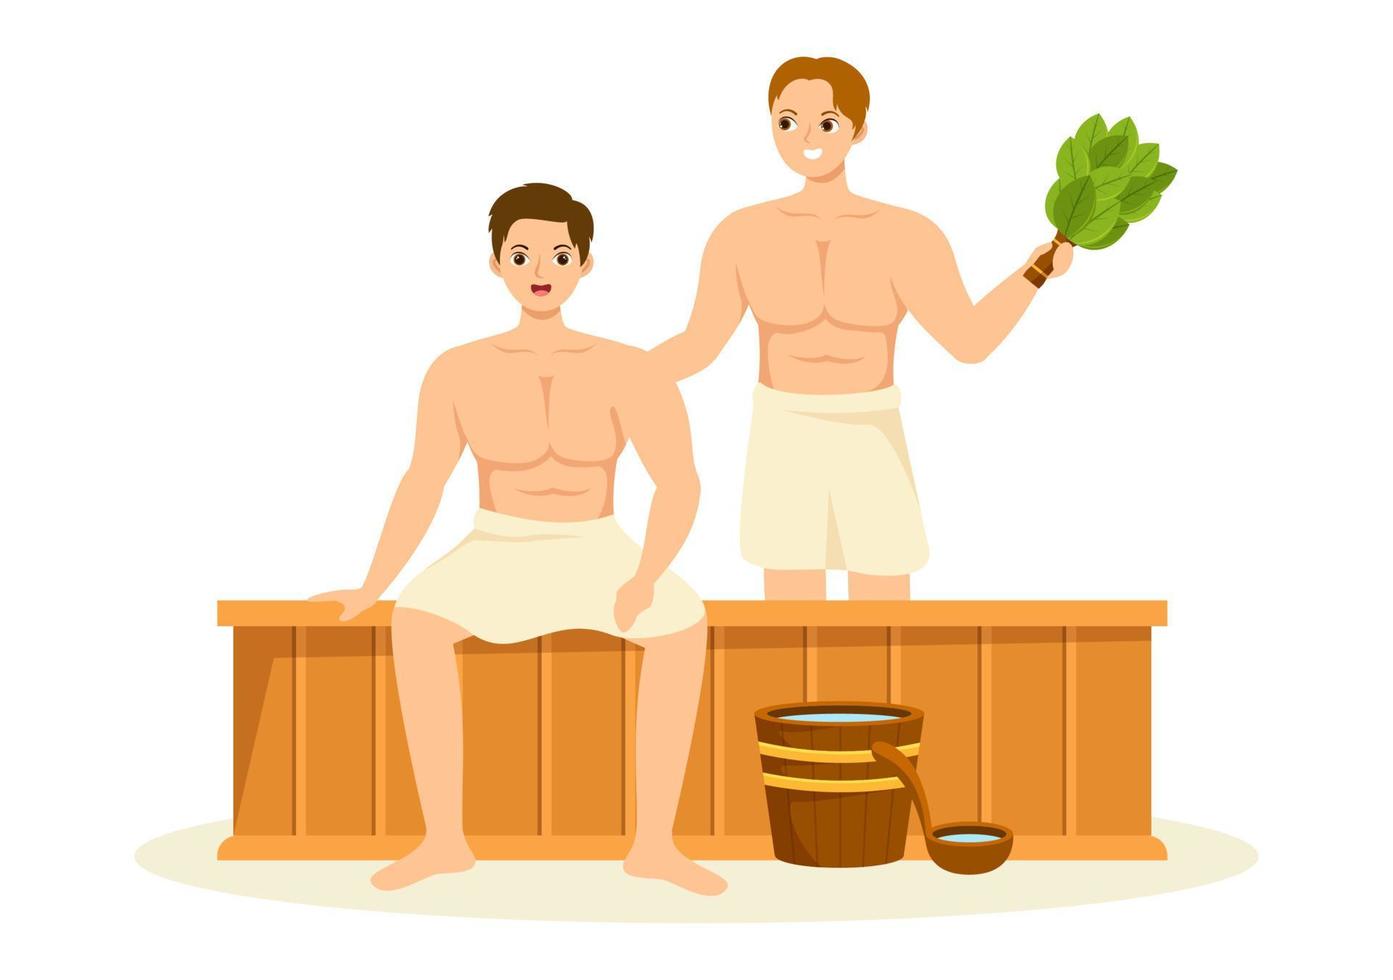 Sauna and Steam Room with People Relax, Washing Their Bodies, Steam or Enjoying Time in Flat Cartoon Hand Drawn Templates Illustration vector